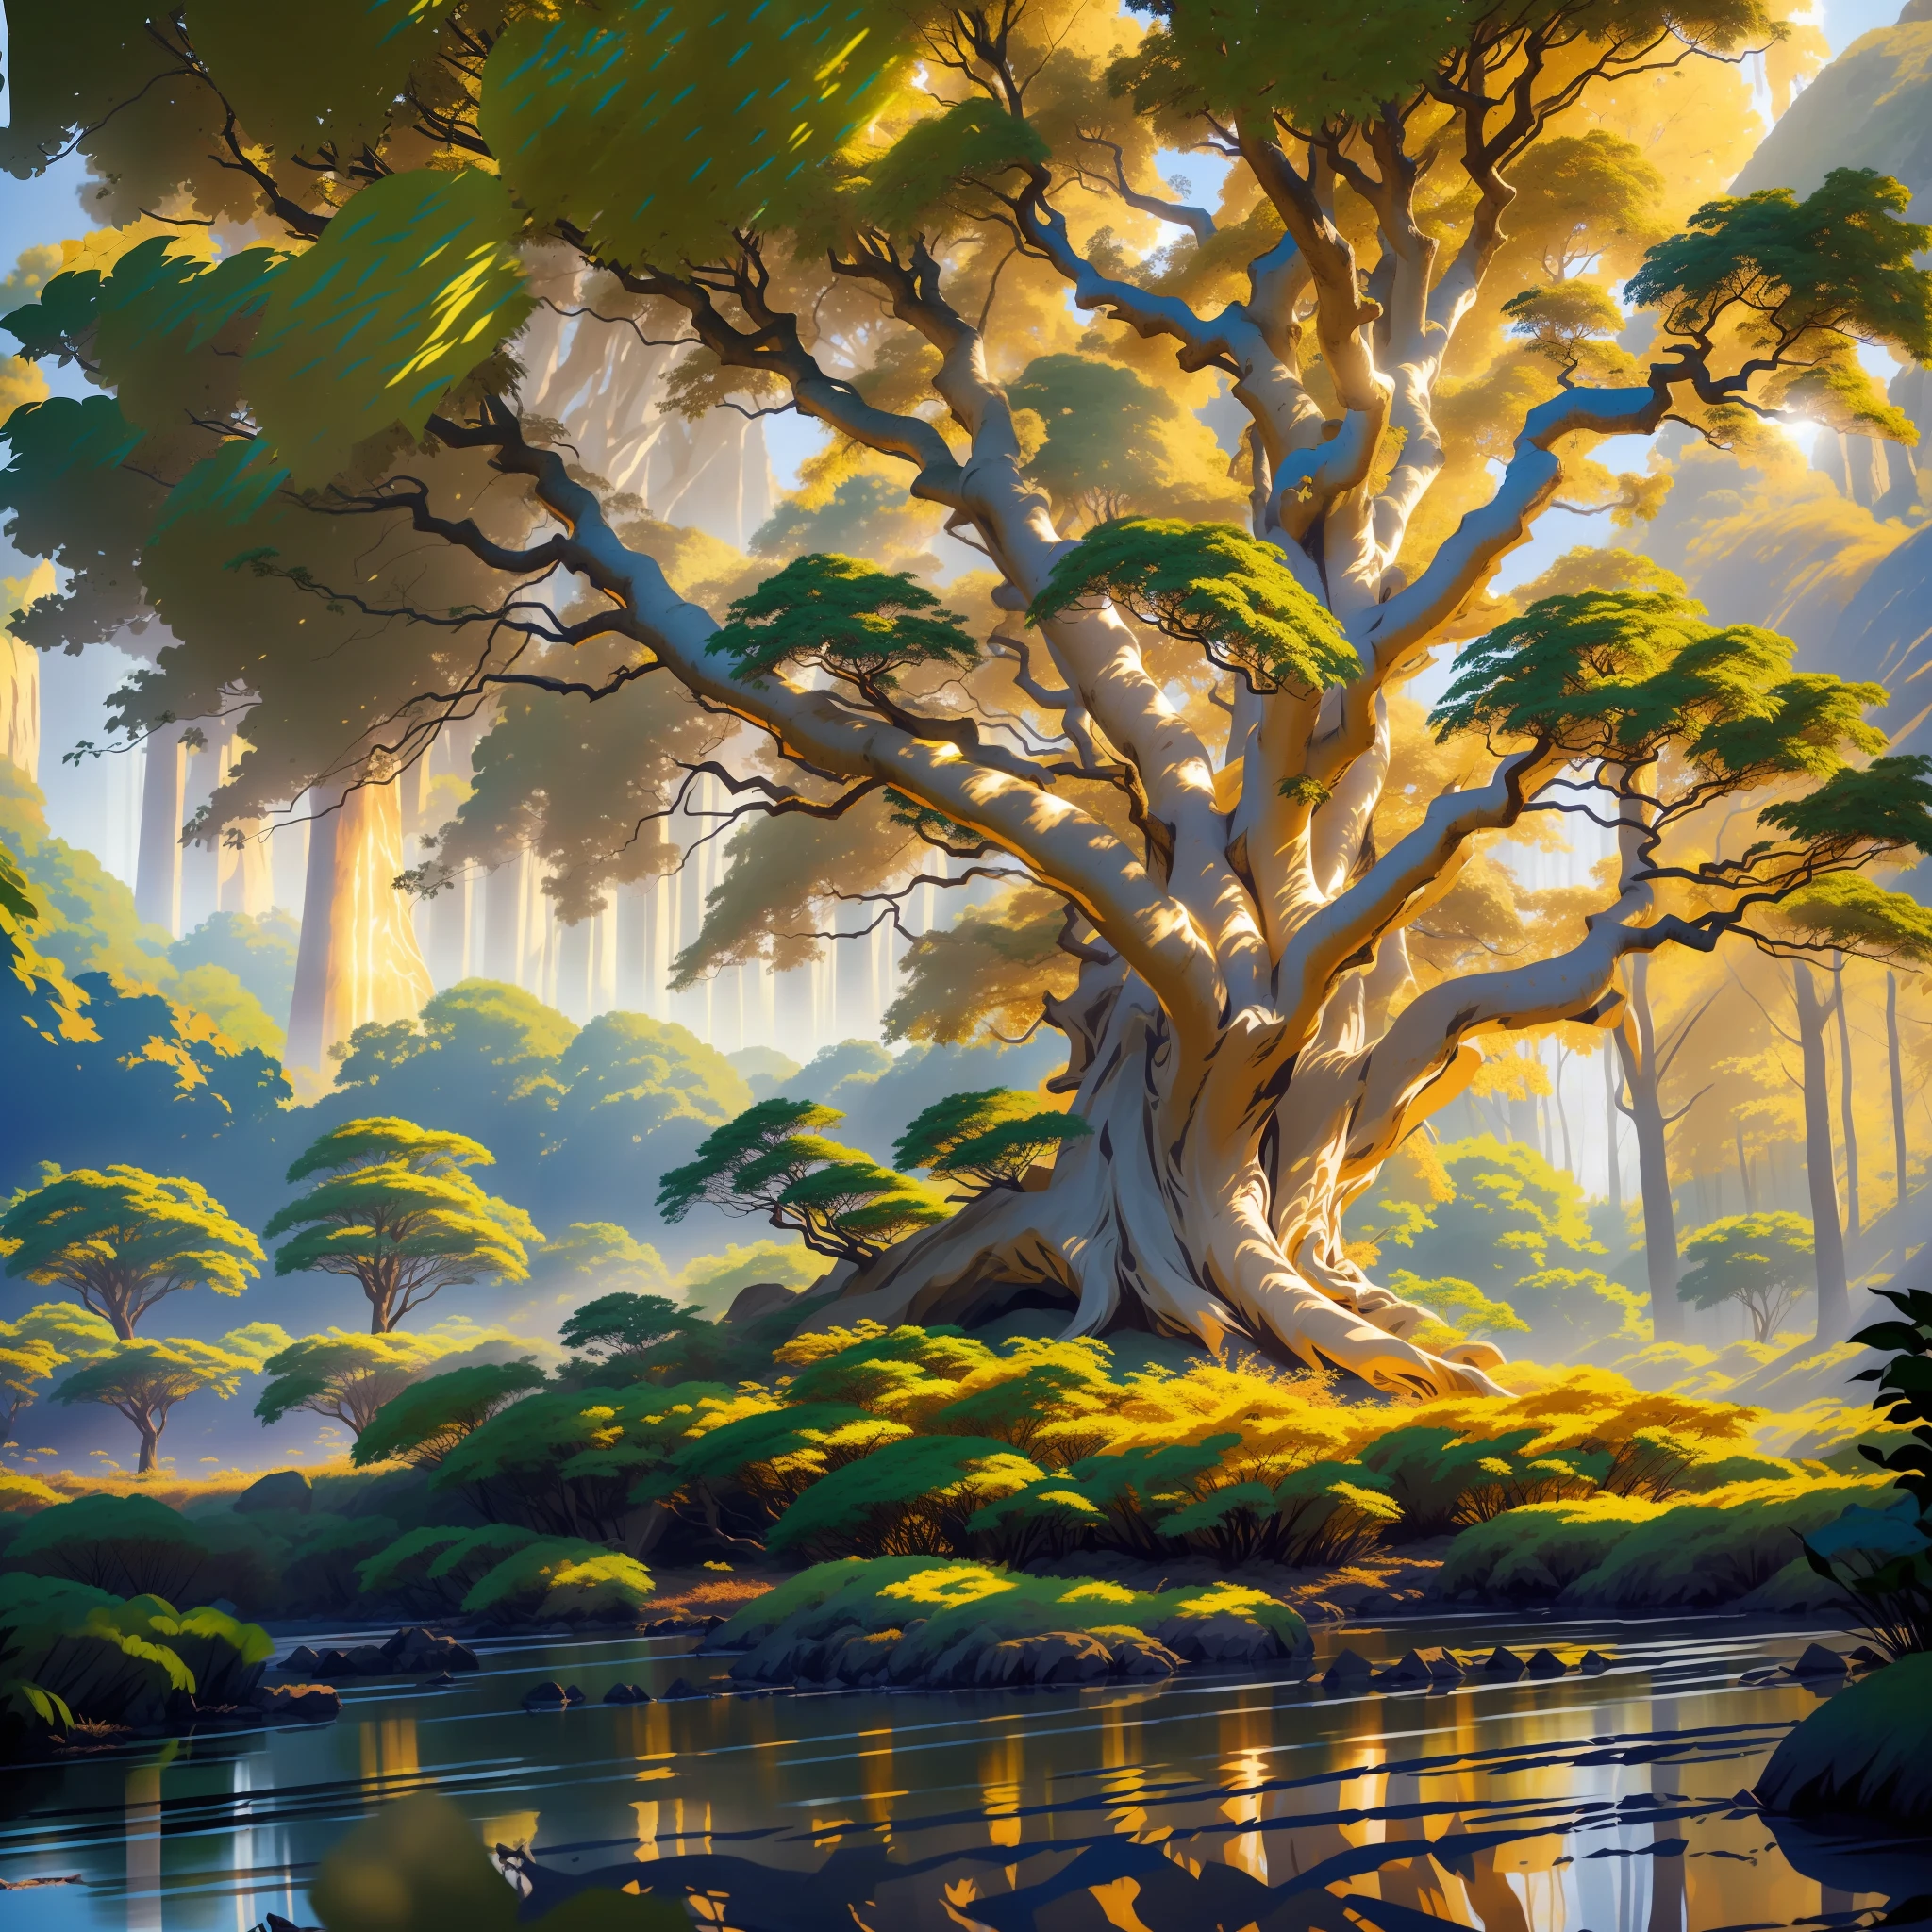 The image shows a majestic tree, with gleaming golden leaves, shining brightly under the sun's rays. Its shimmering foliage captures the attention of all who pass by, emanating an almost otherworldly glow.